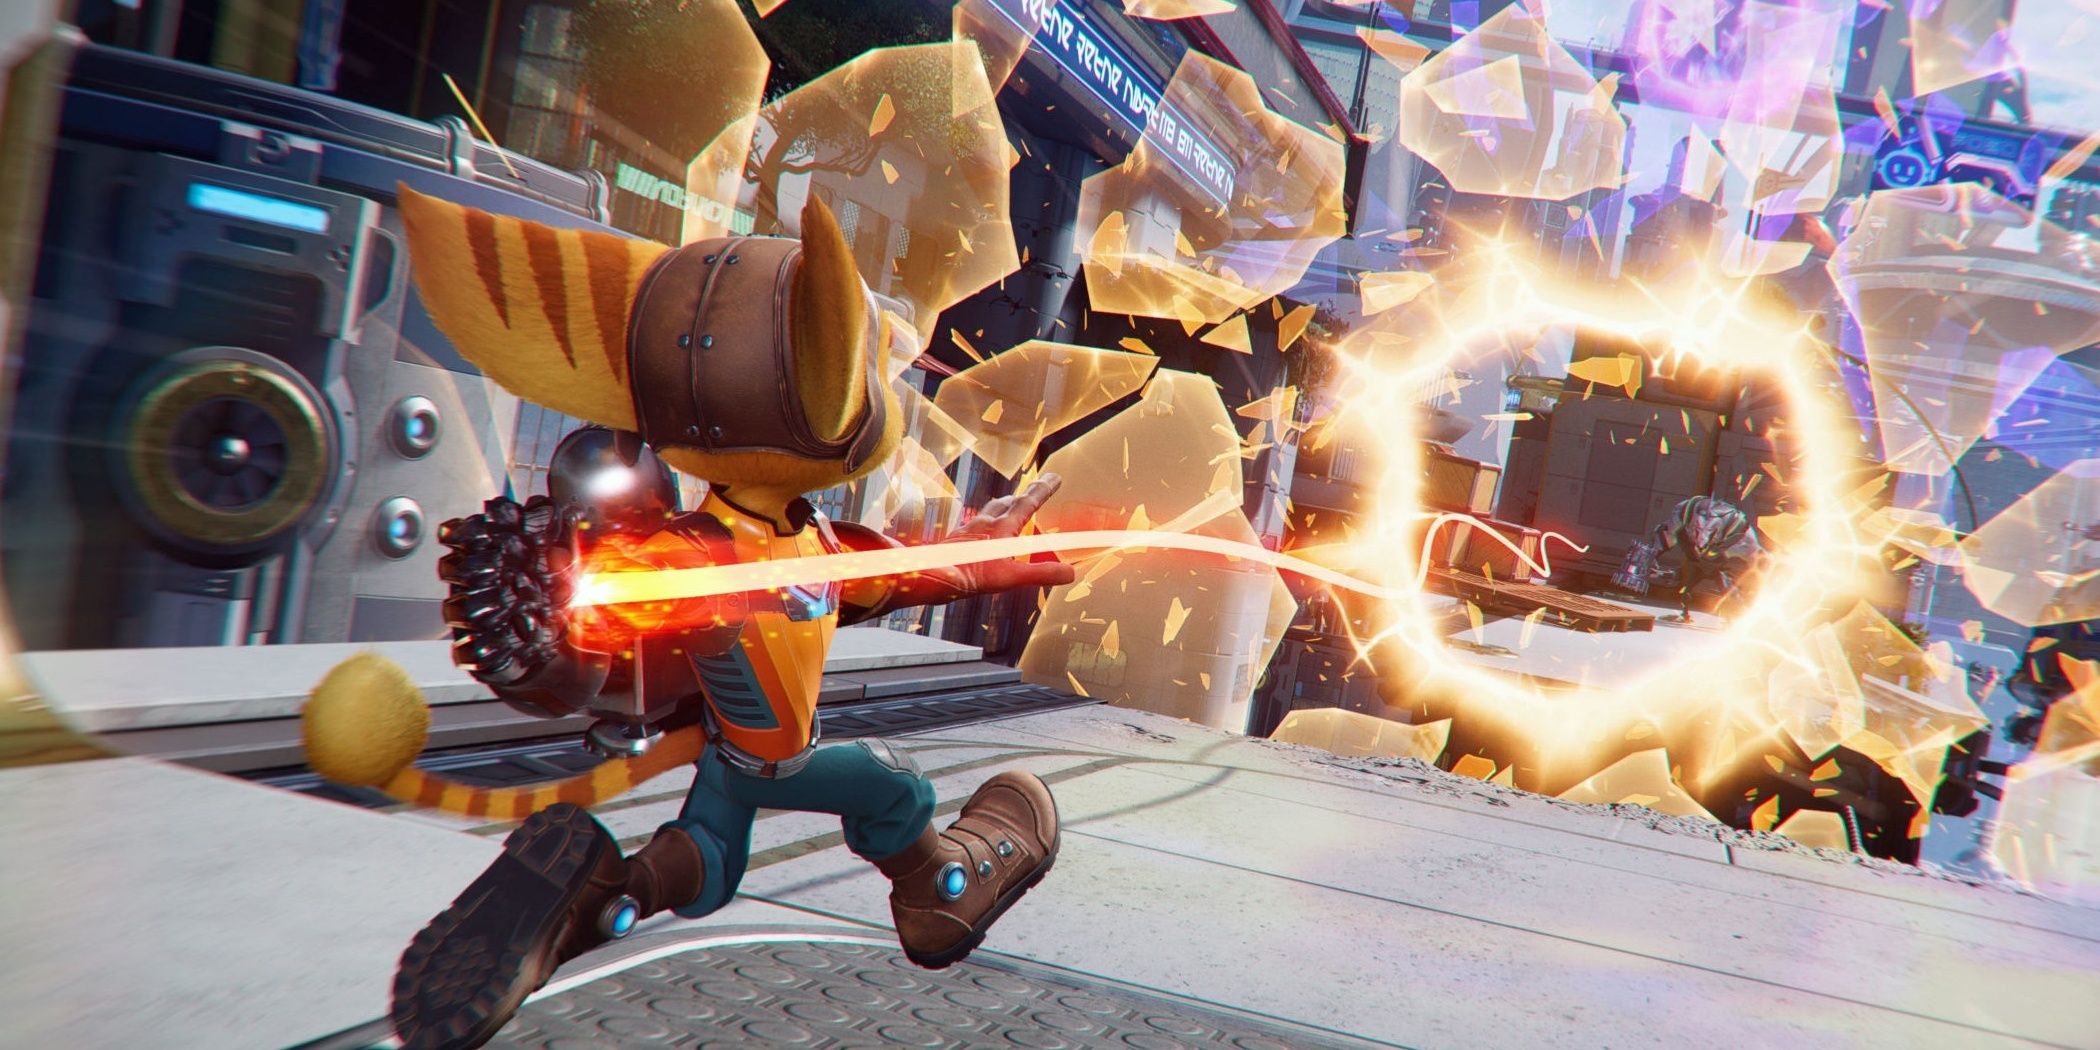 Screenshot showing series protagonist Ratchet the lombax about to travel into a new area through interdimensional rifts.